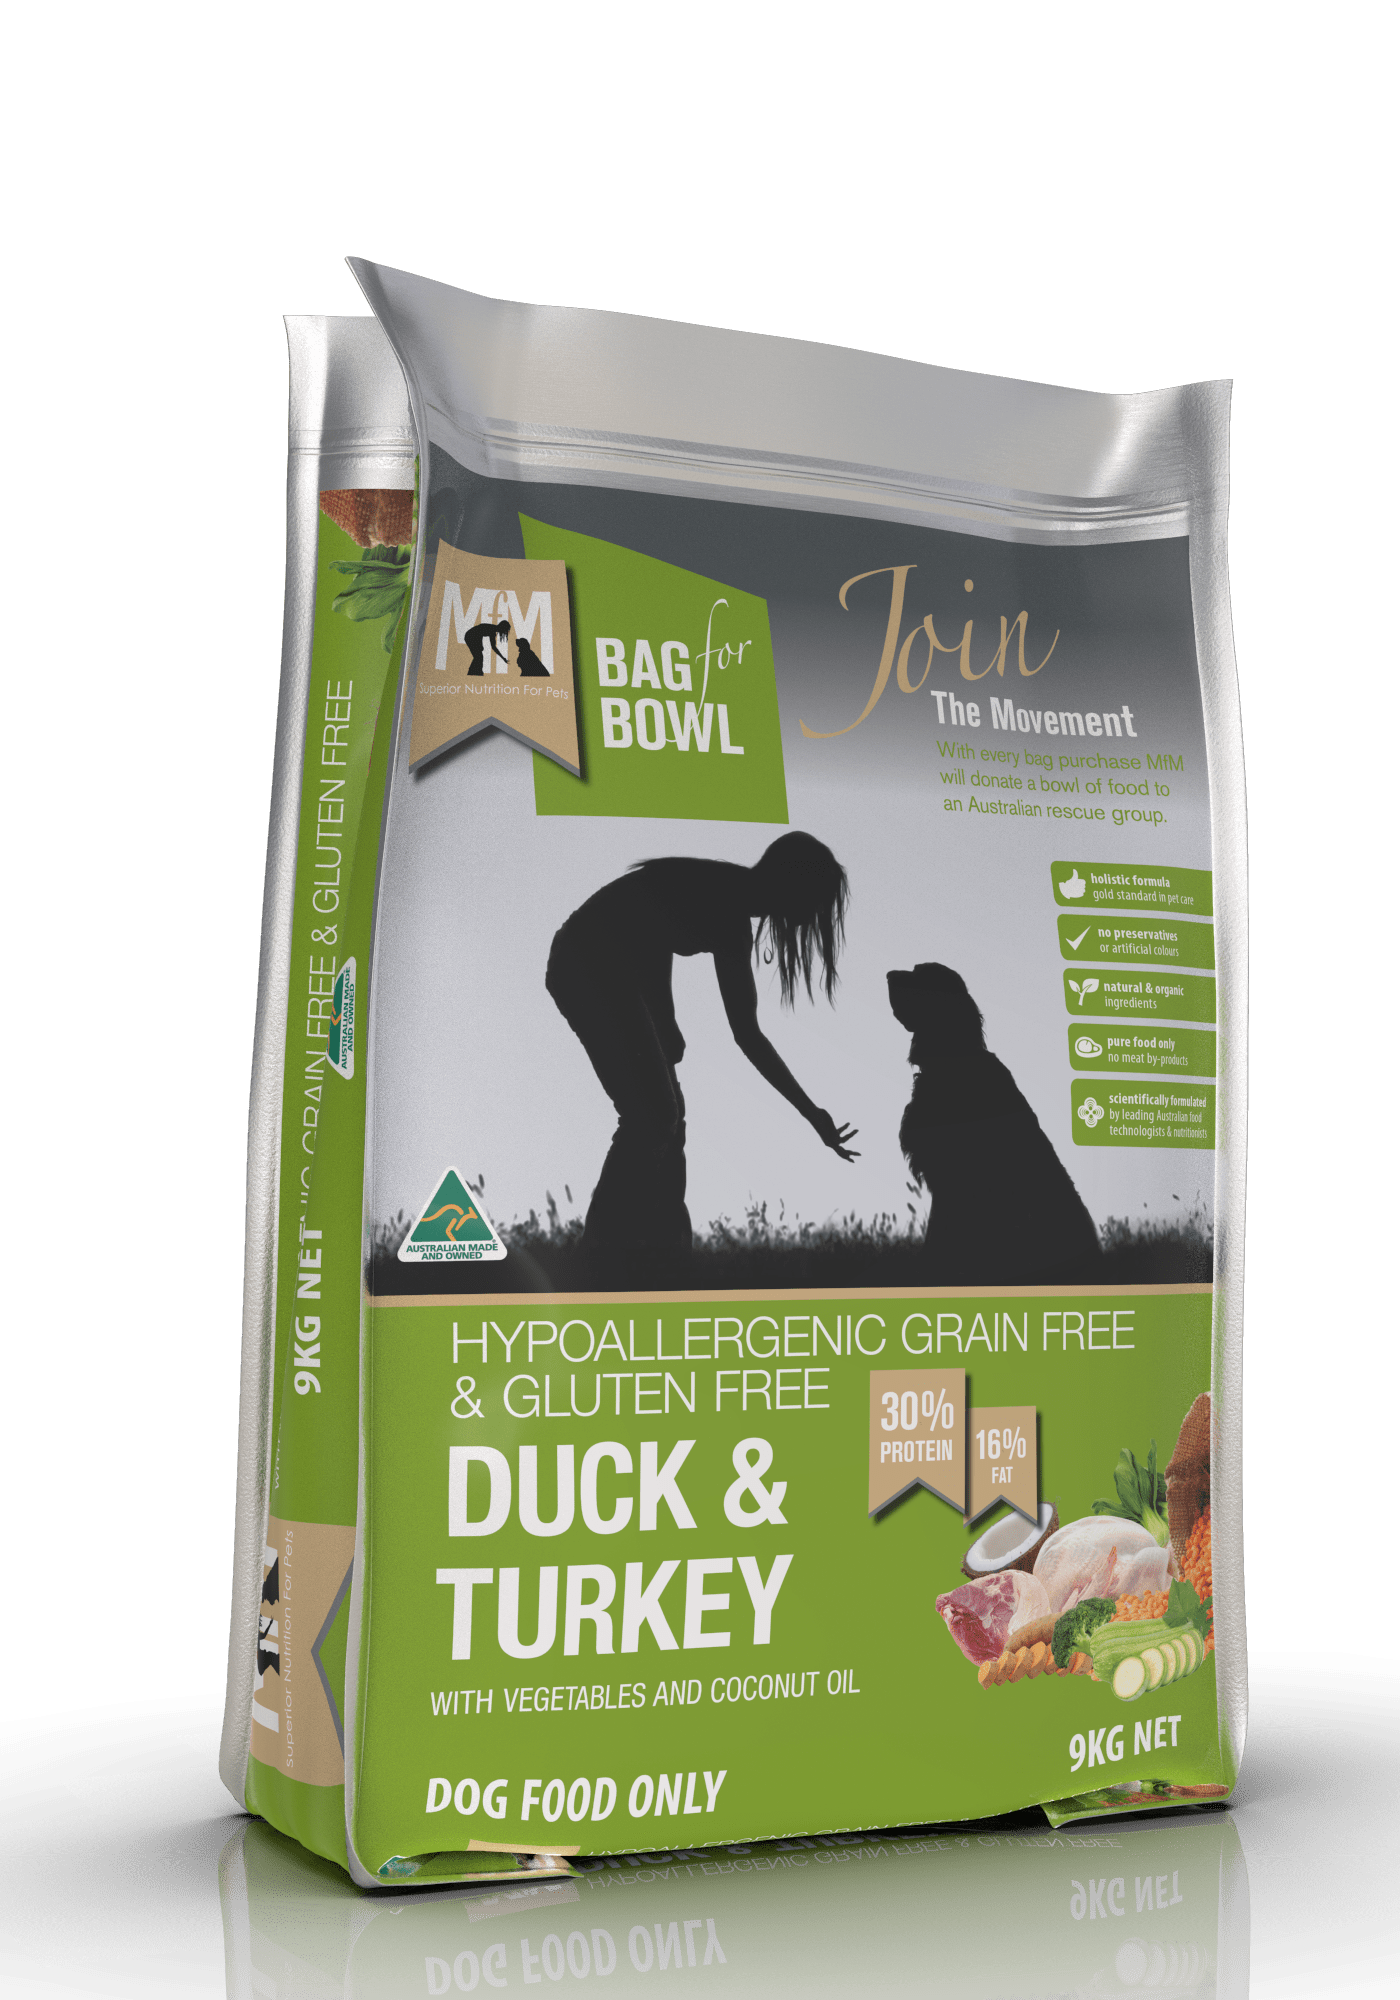 Meals For Mutts Dog Dry Food Default Meals For Mutts Dog Grain Free Duck & Turkey 9Kg